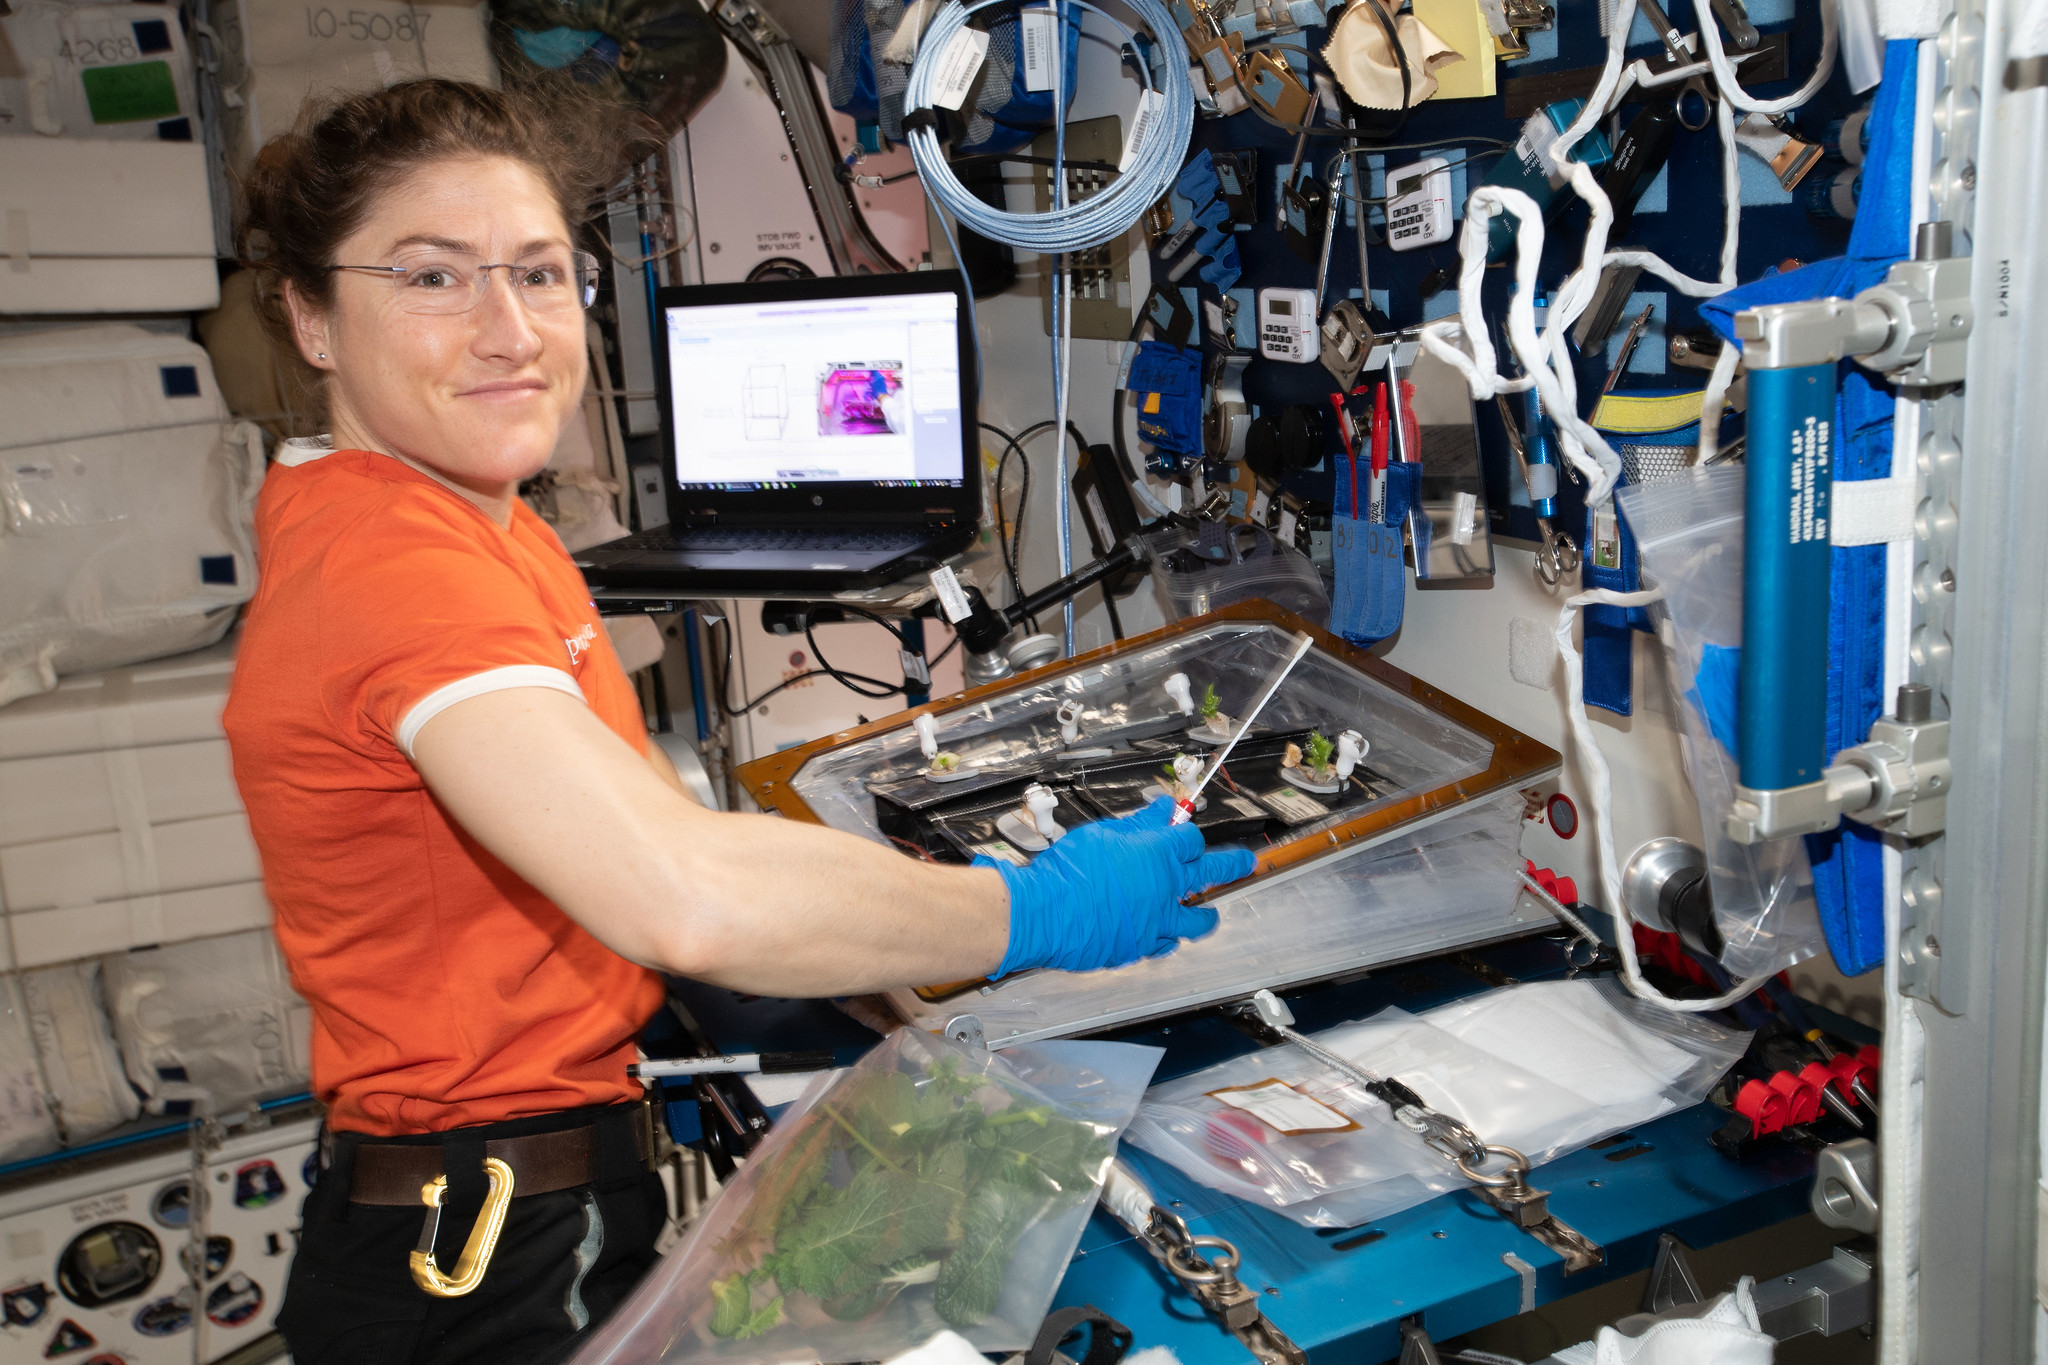 NASA astronaut Christina Koch conducts botany research aboard the International Space Station.